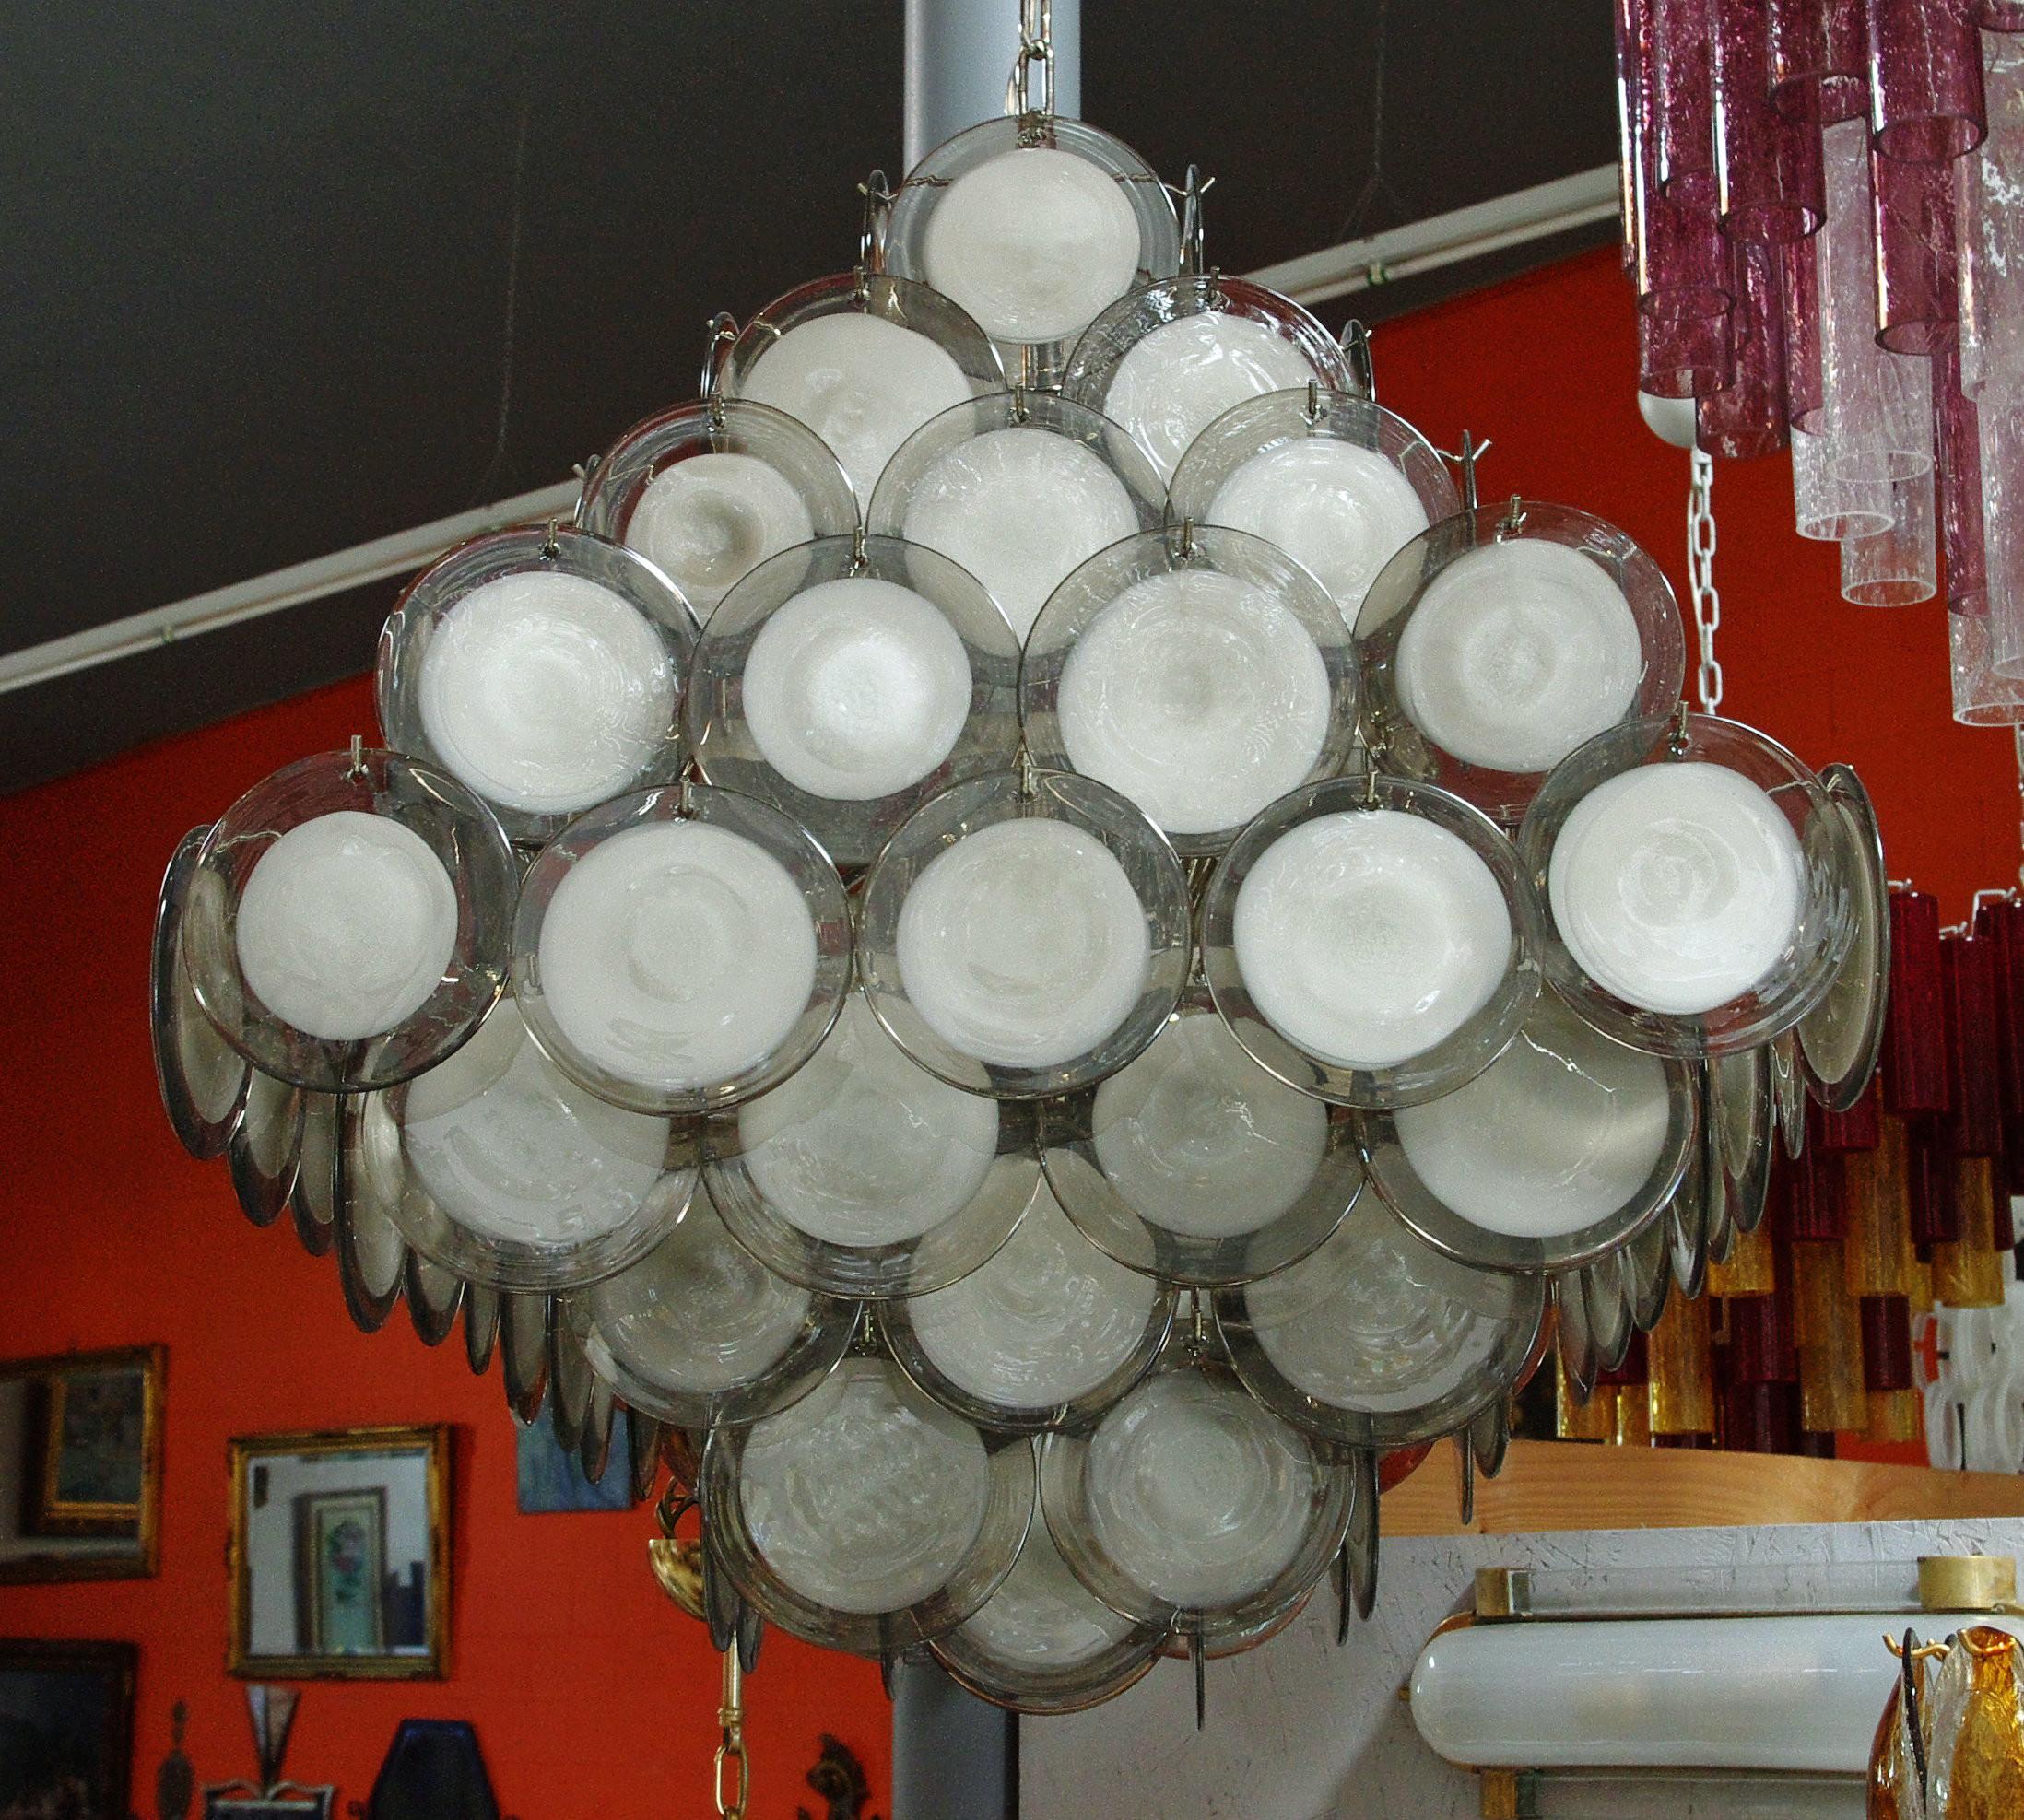 Italian chandelier with smoky and white infused Murano glass discs mounted on chrome frame by Fabio Ltd / Made in Italy
12 lights / E26 or E27 type / max 60W each
Measures: Length 30 inches, width 30 inches, height 30 inches plus chain and